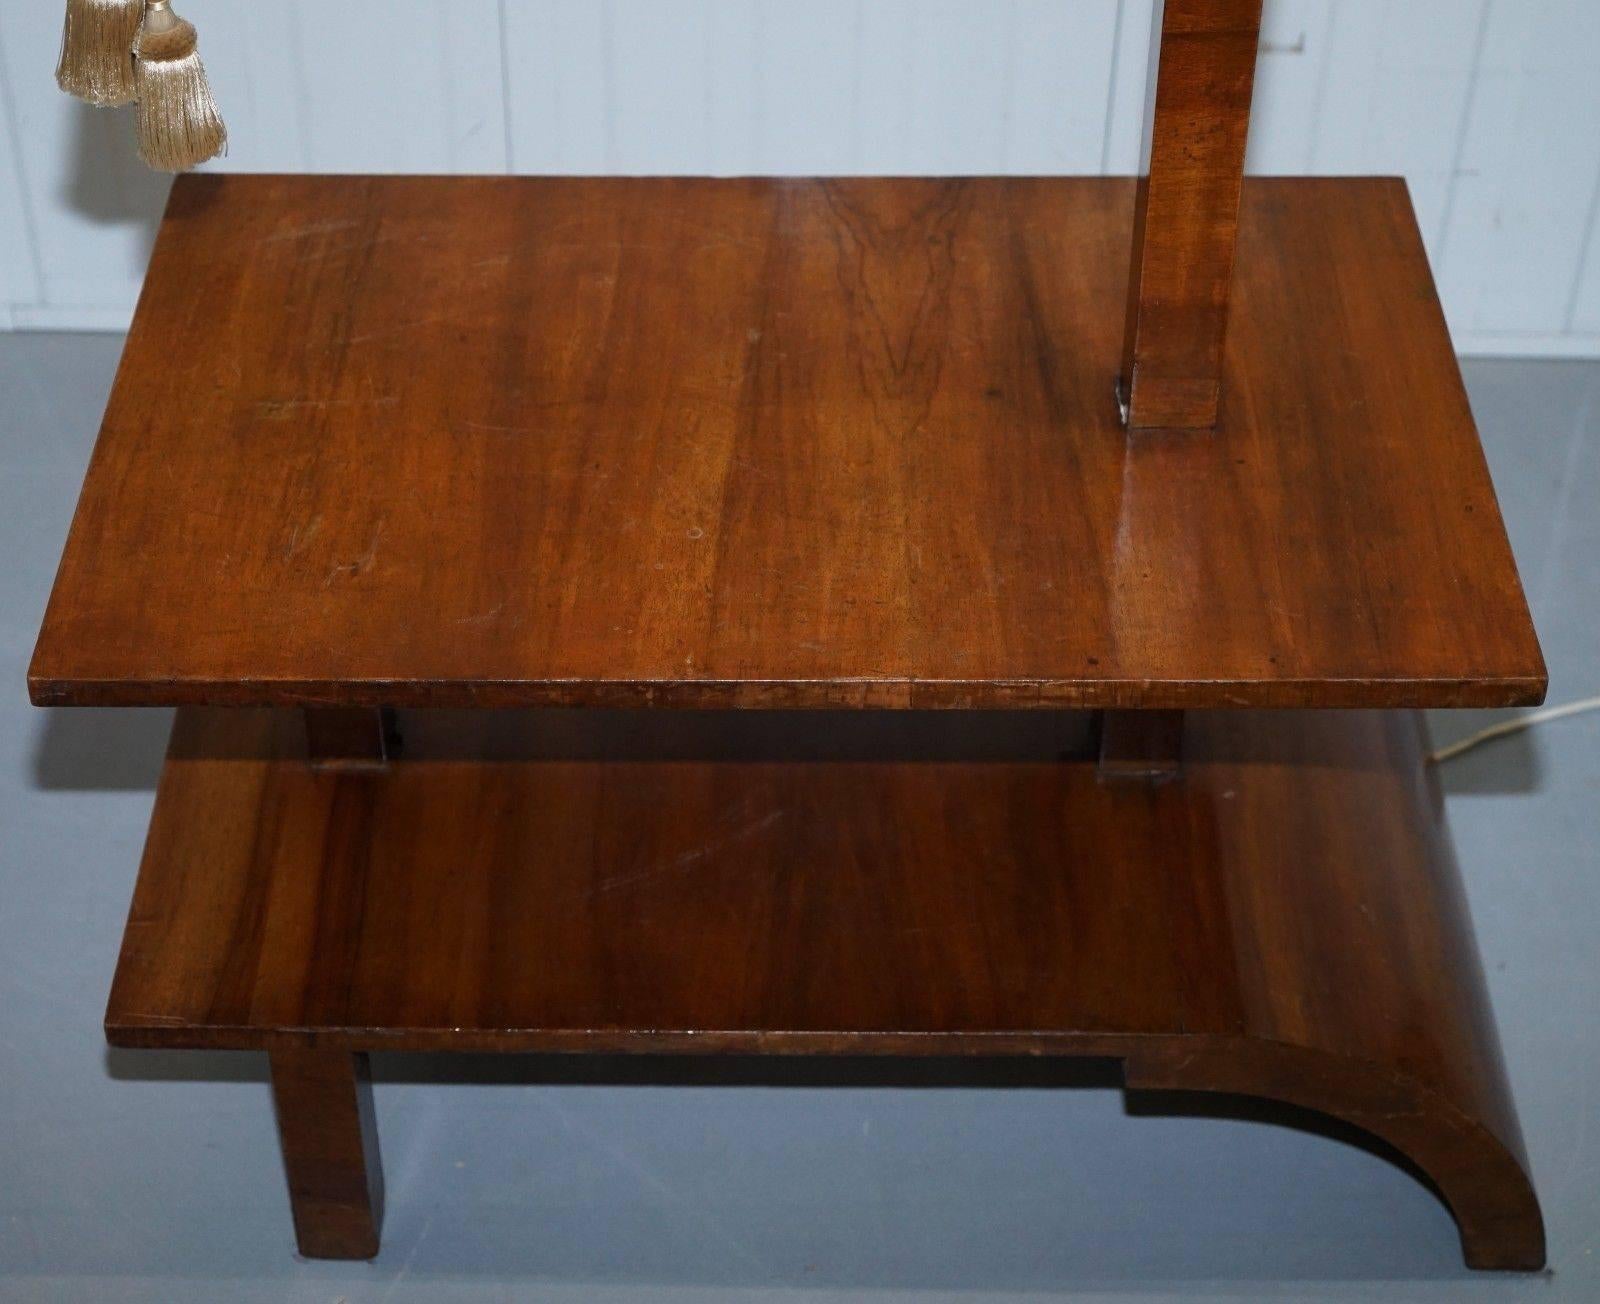 We are delighted to offer for sale this absolutely stunning original Art Deco walnut side table with built in height adjustable lamp

A very rare early Deco piece in lovely lightly restored condition. The height adjustment works as it should, it’s